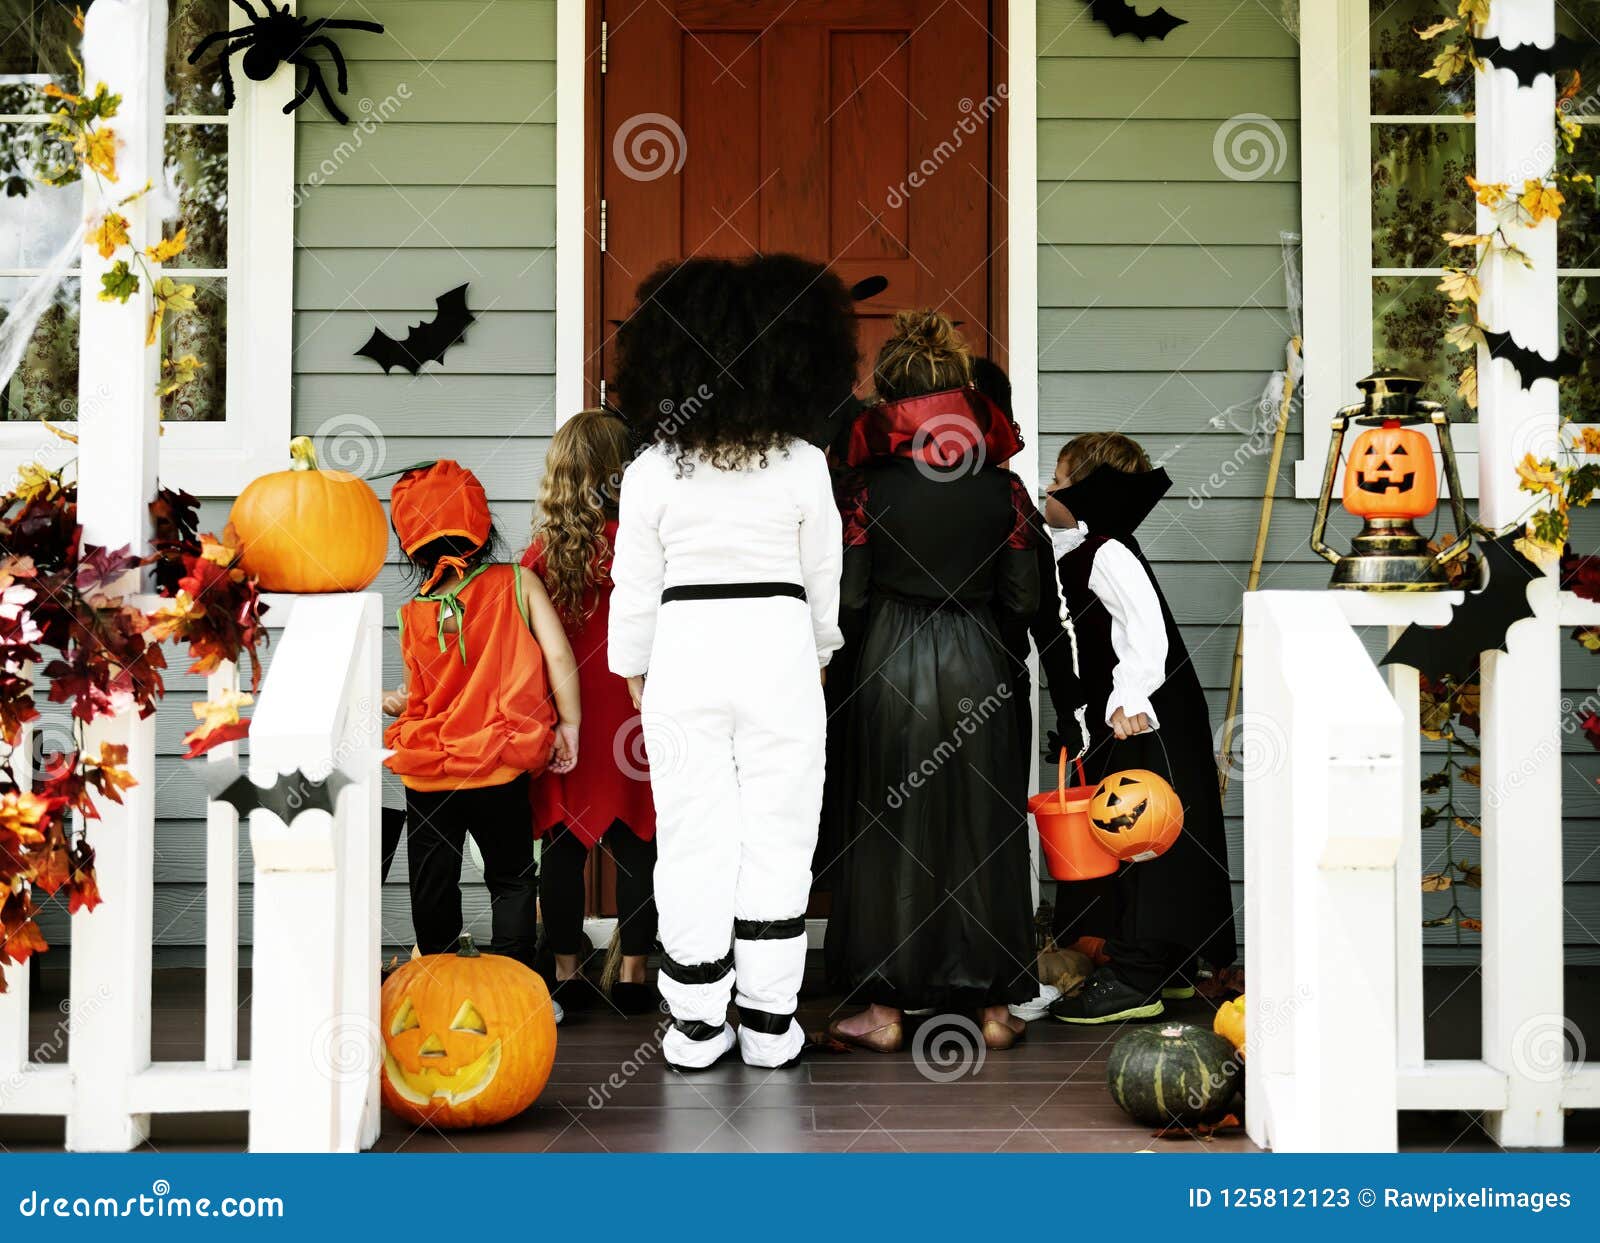 little kids trick or treating